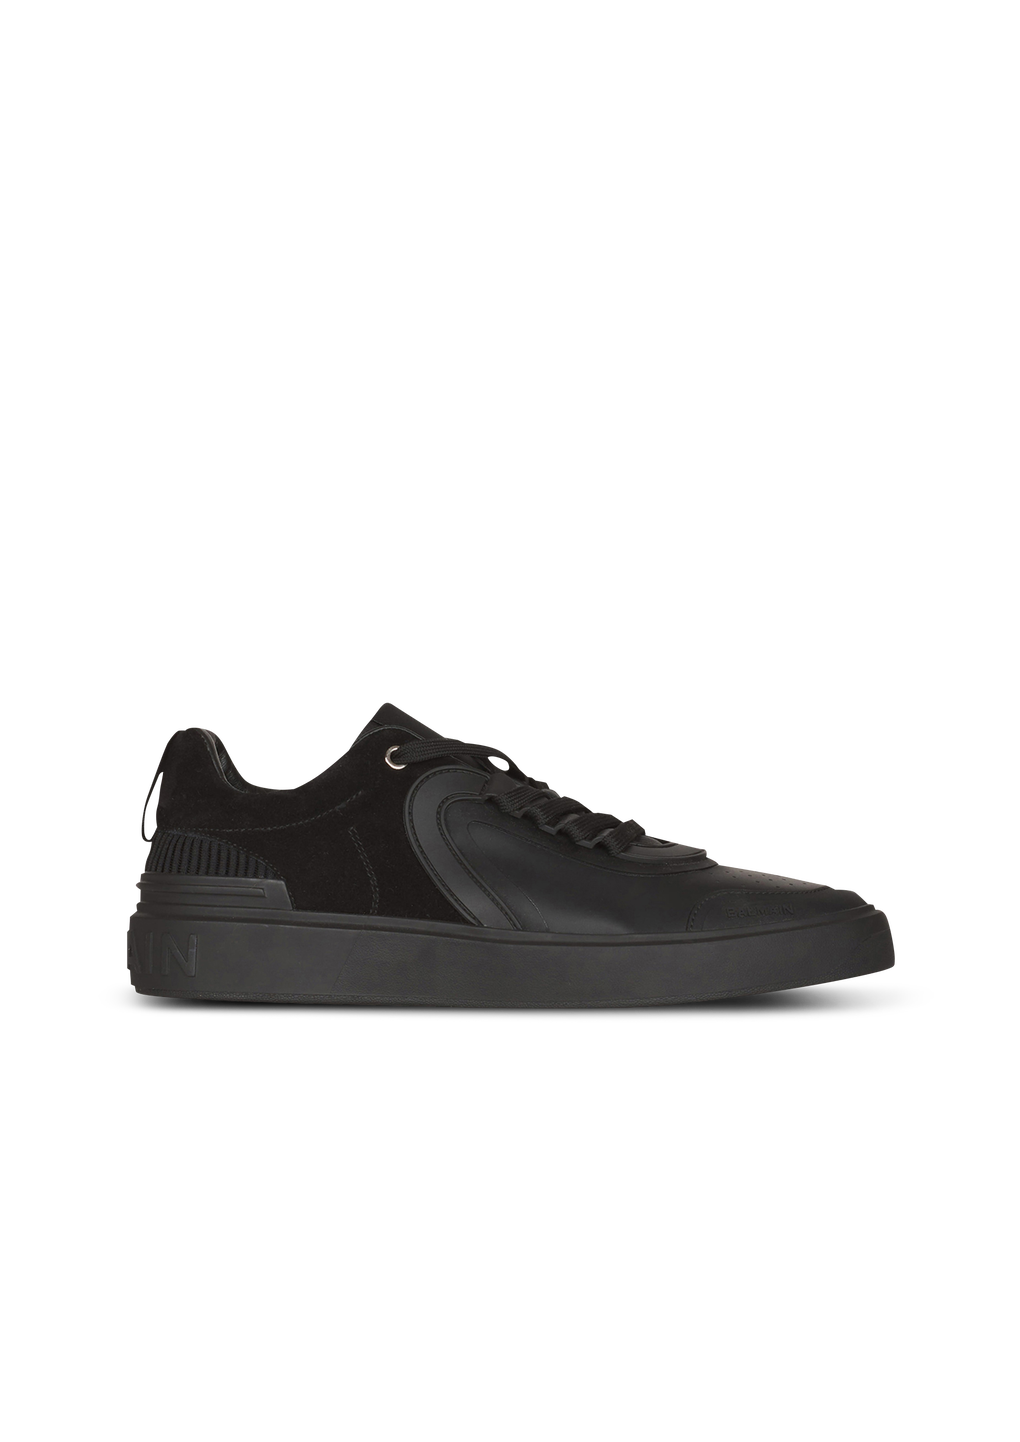 Leather and suede B-Skate sneakers, black, hi-res